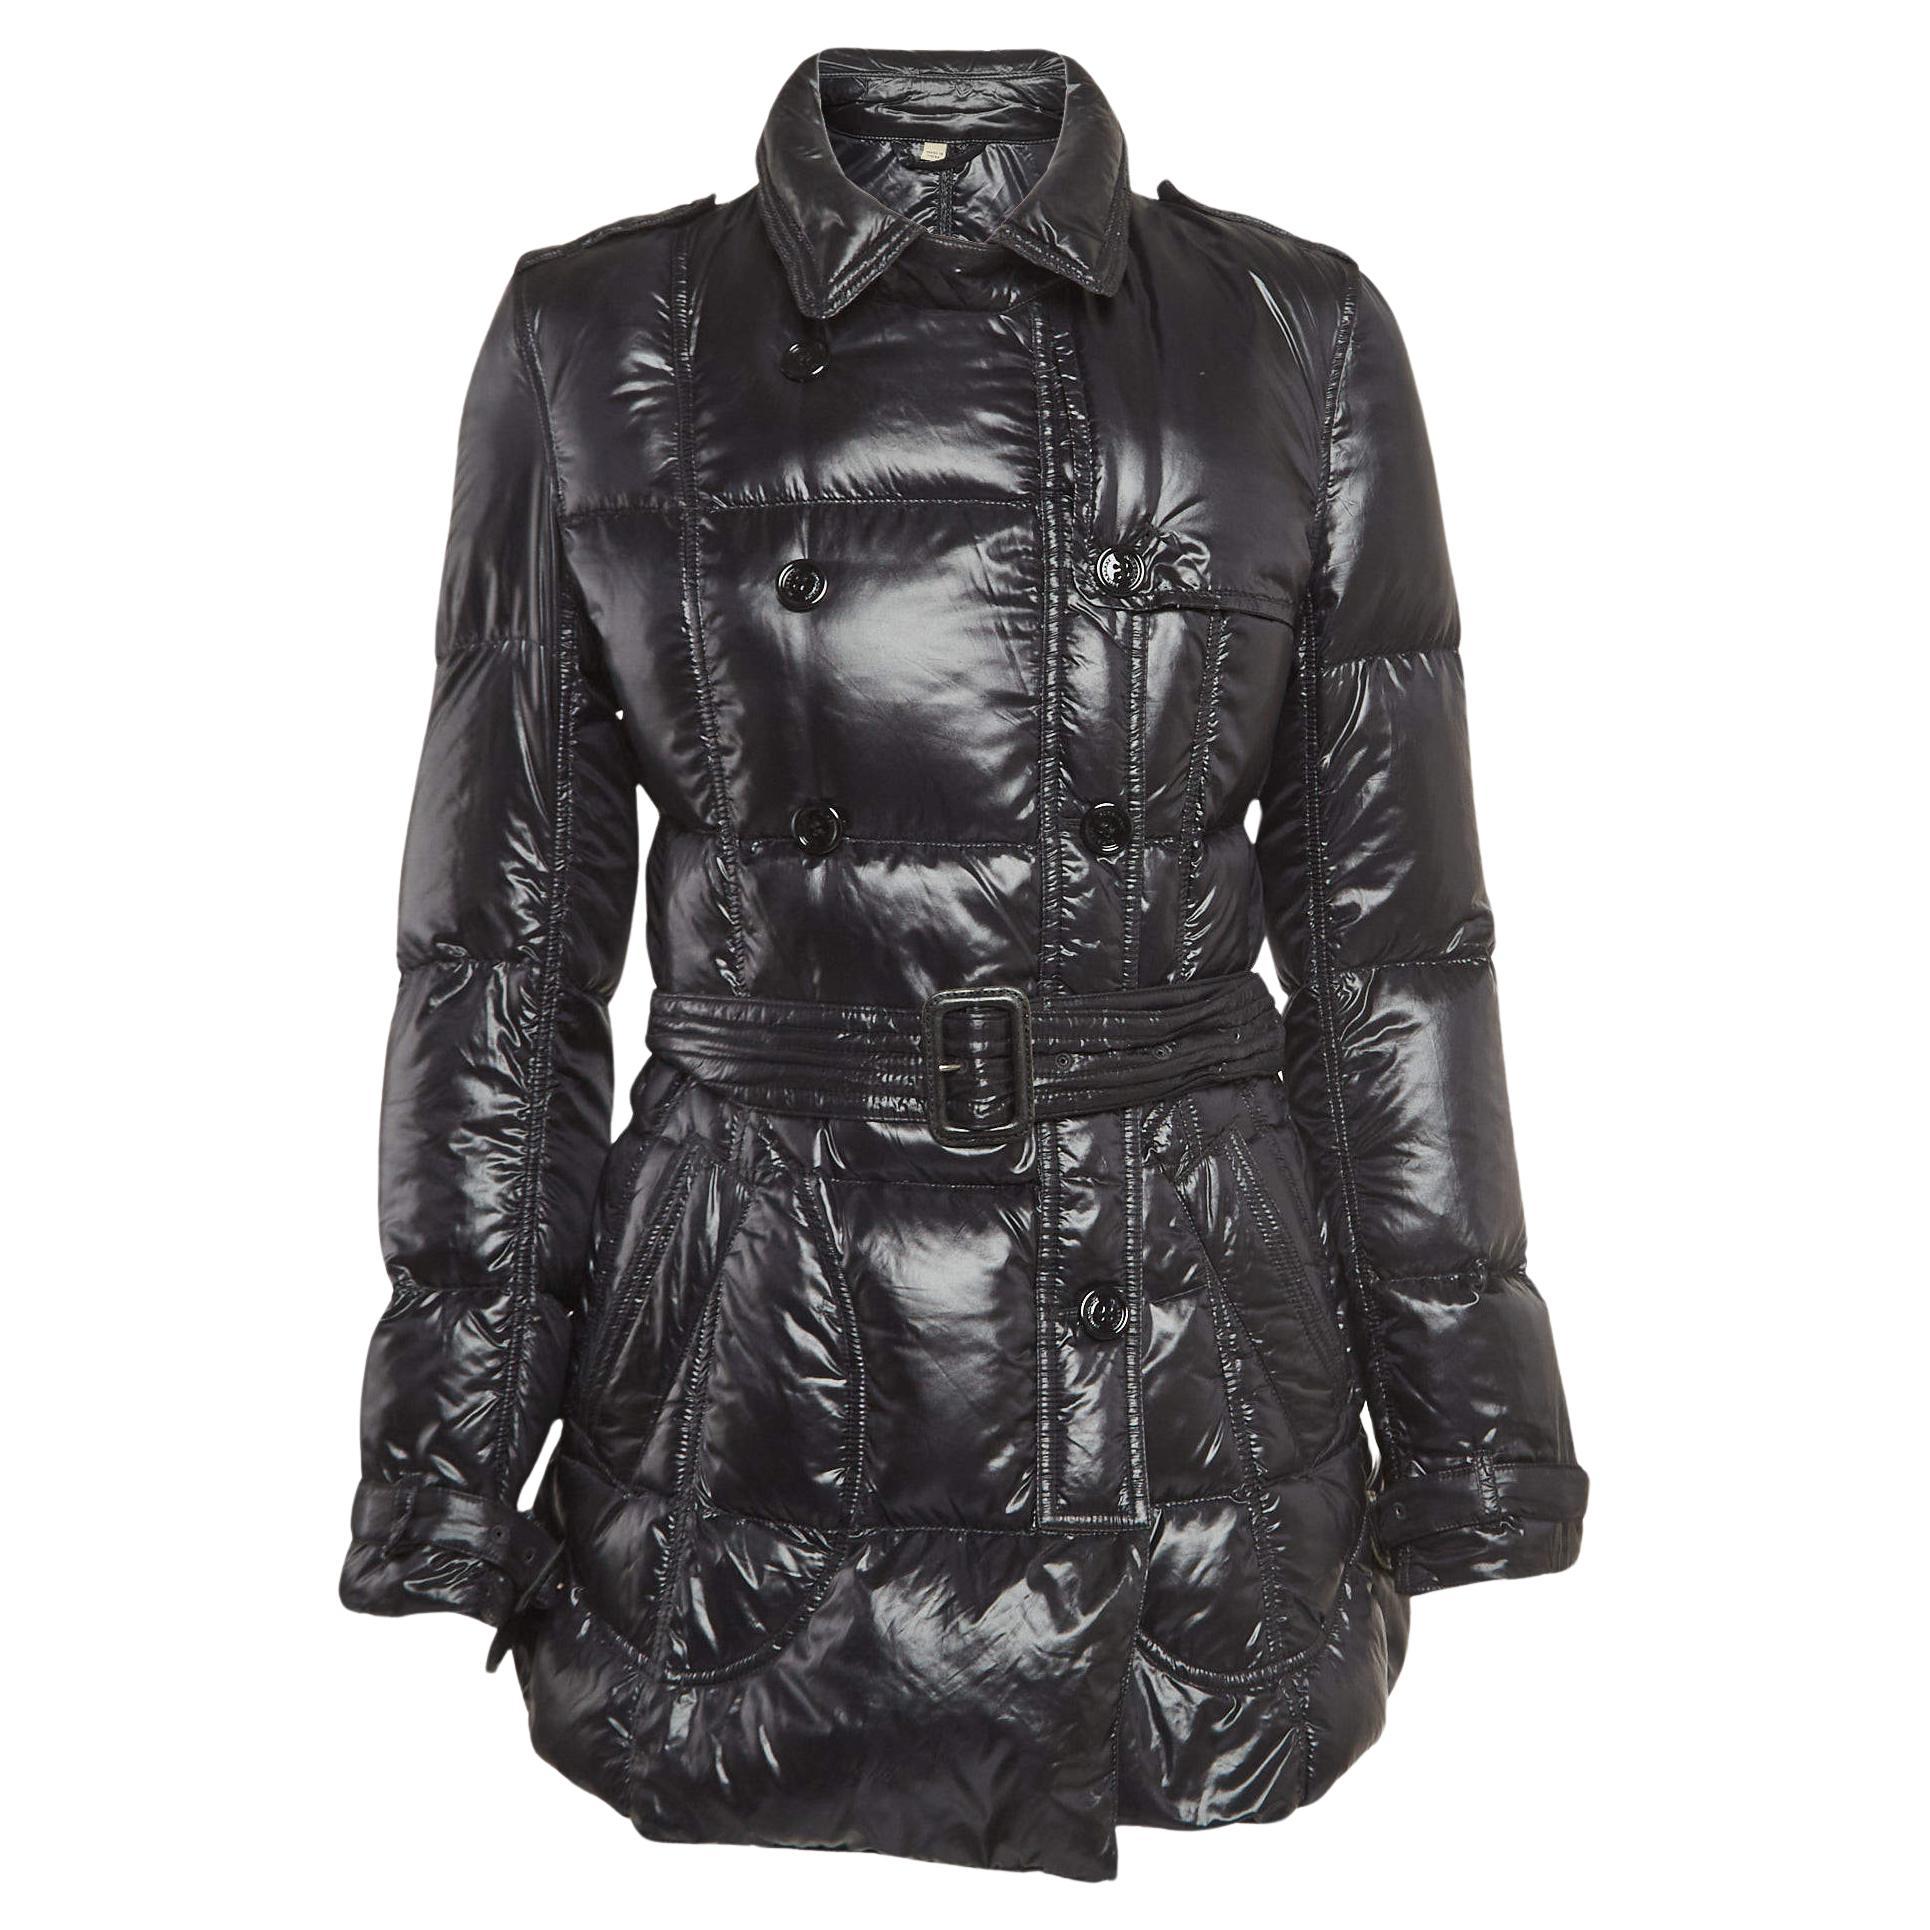 Burberry Black Nylon Belted Double Breasted Puffer Jacket M